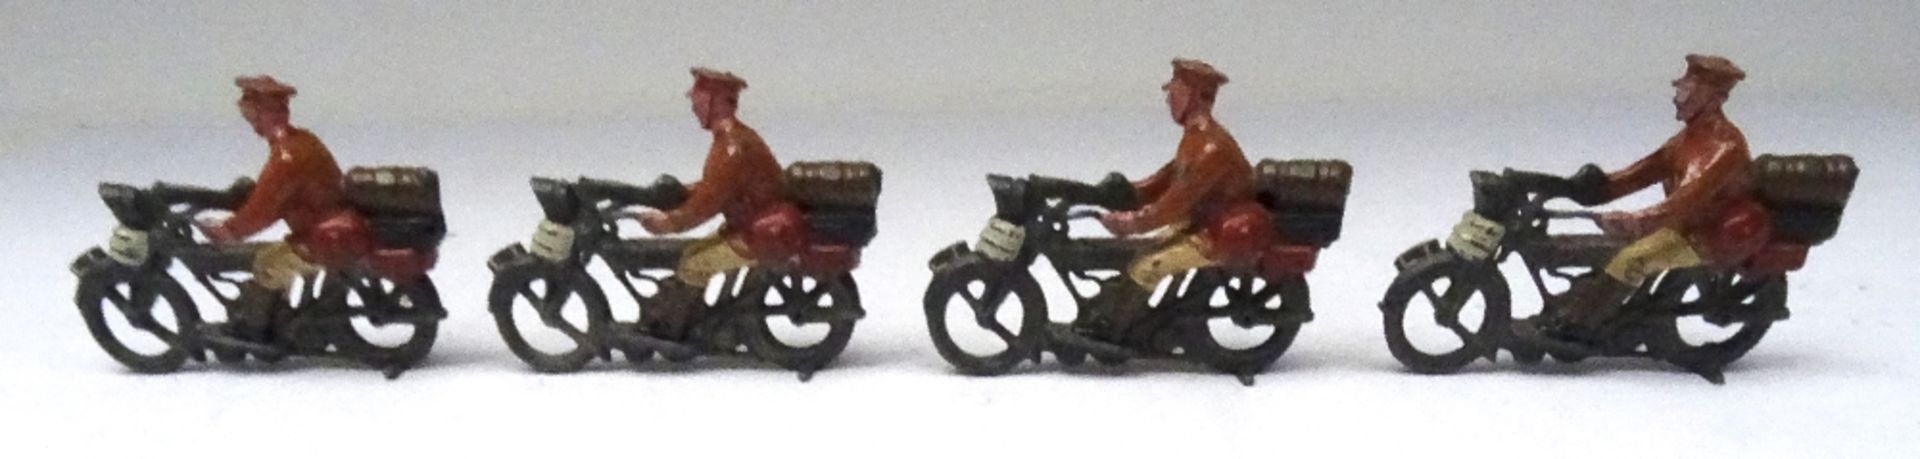 Britains set 200, Dispatch Riders on Motorcycles